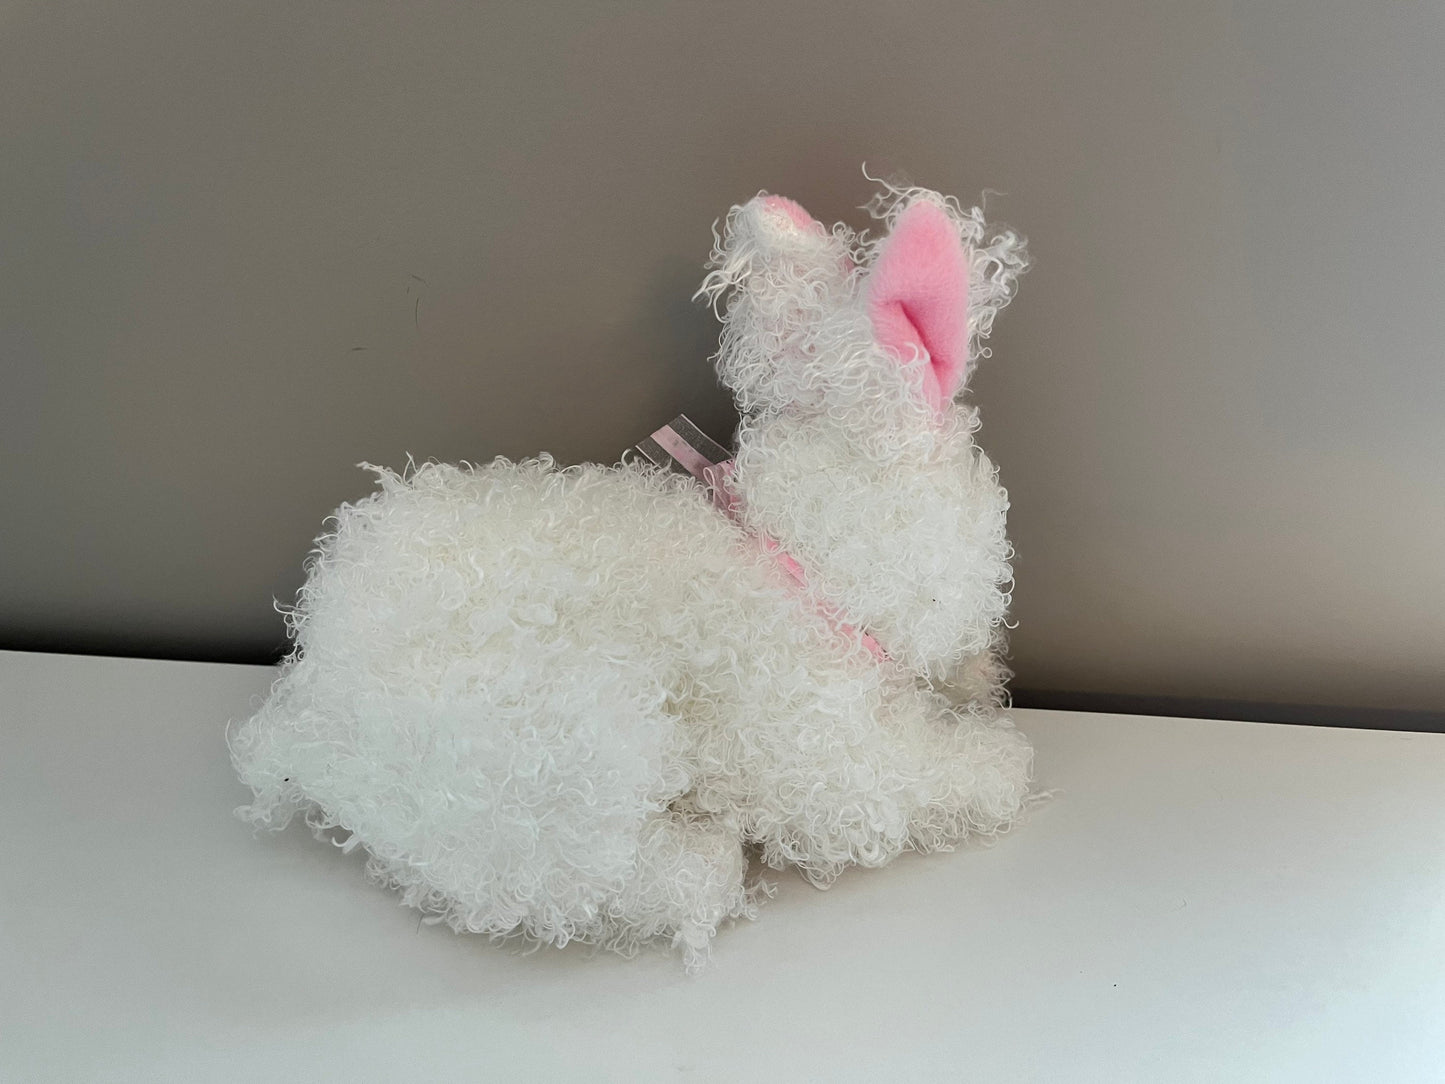 Ty Classics Collection “Presto” the White Bunny Rabbit with Pink Bow (8 inch)